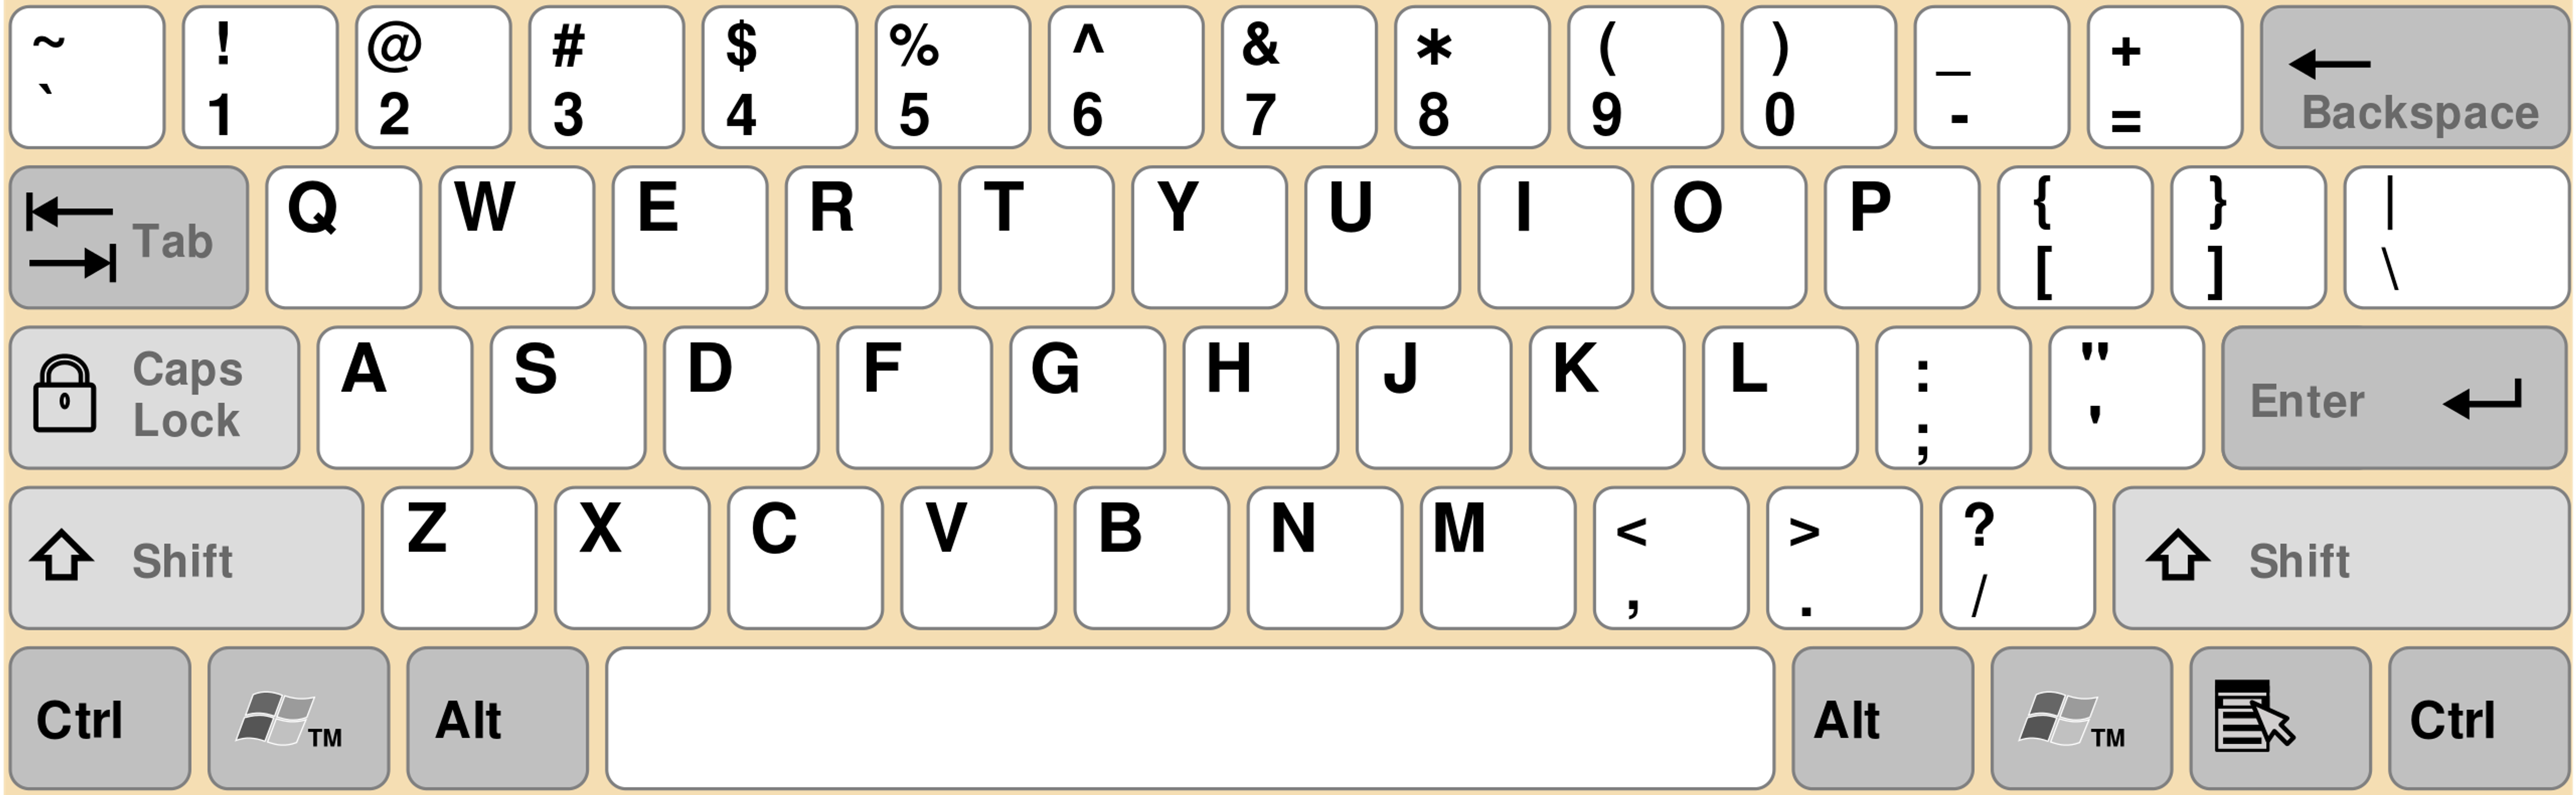 clavier-qwerty-us